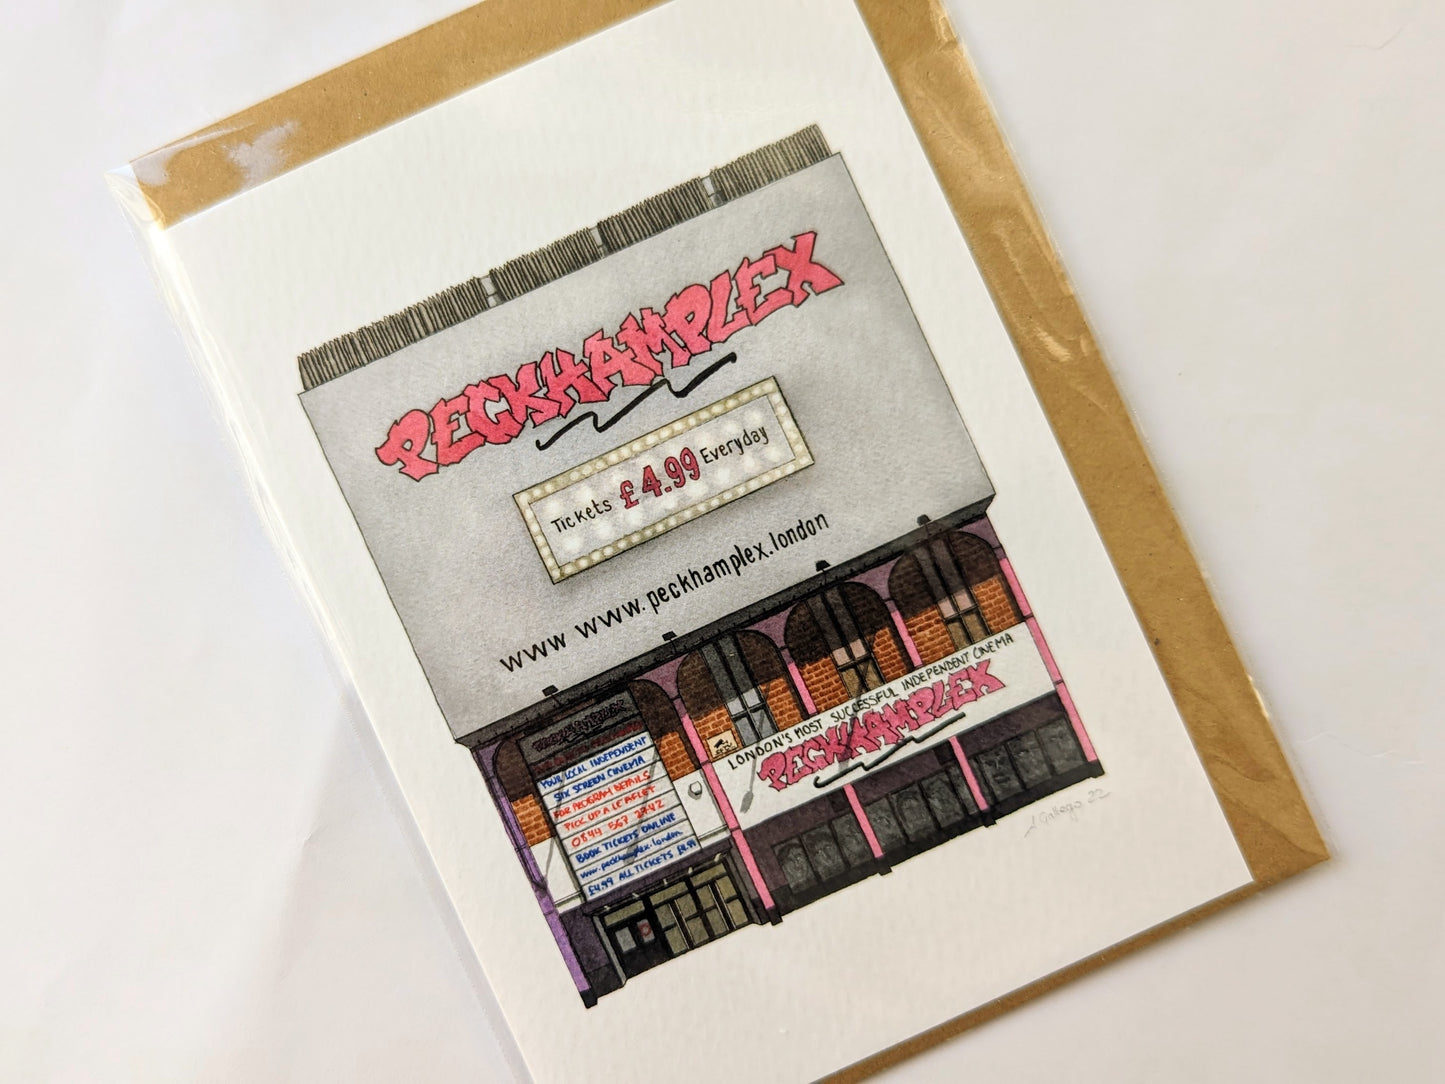 SECONDS - Peckhamplex - Greeting card with envelope